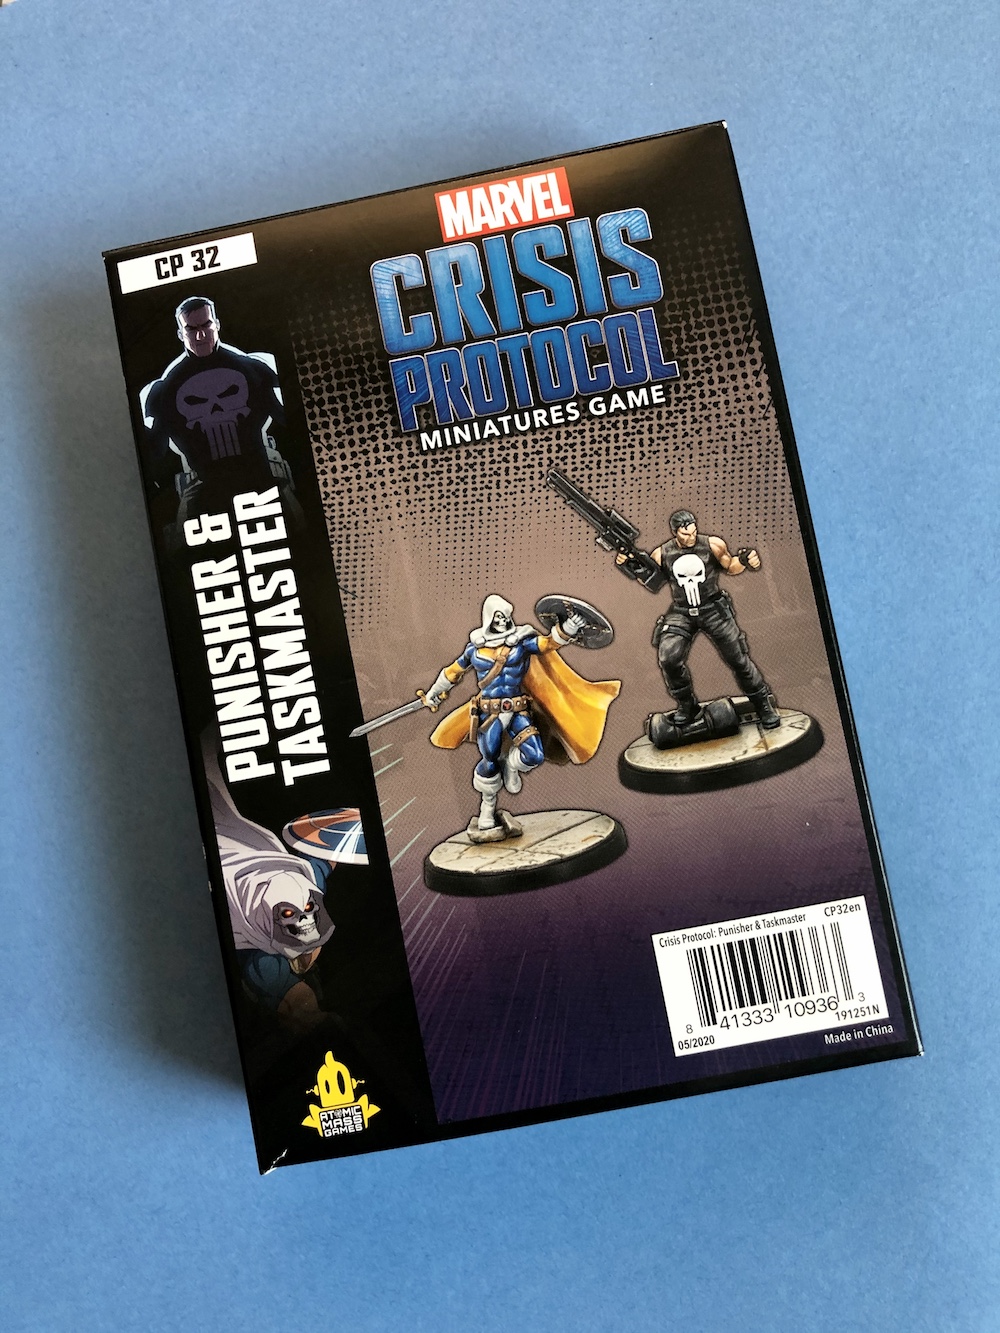 Marvel Crisis Protocol Punisher and Taskmaster Tabletop Miniatures NEW